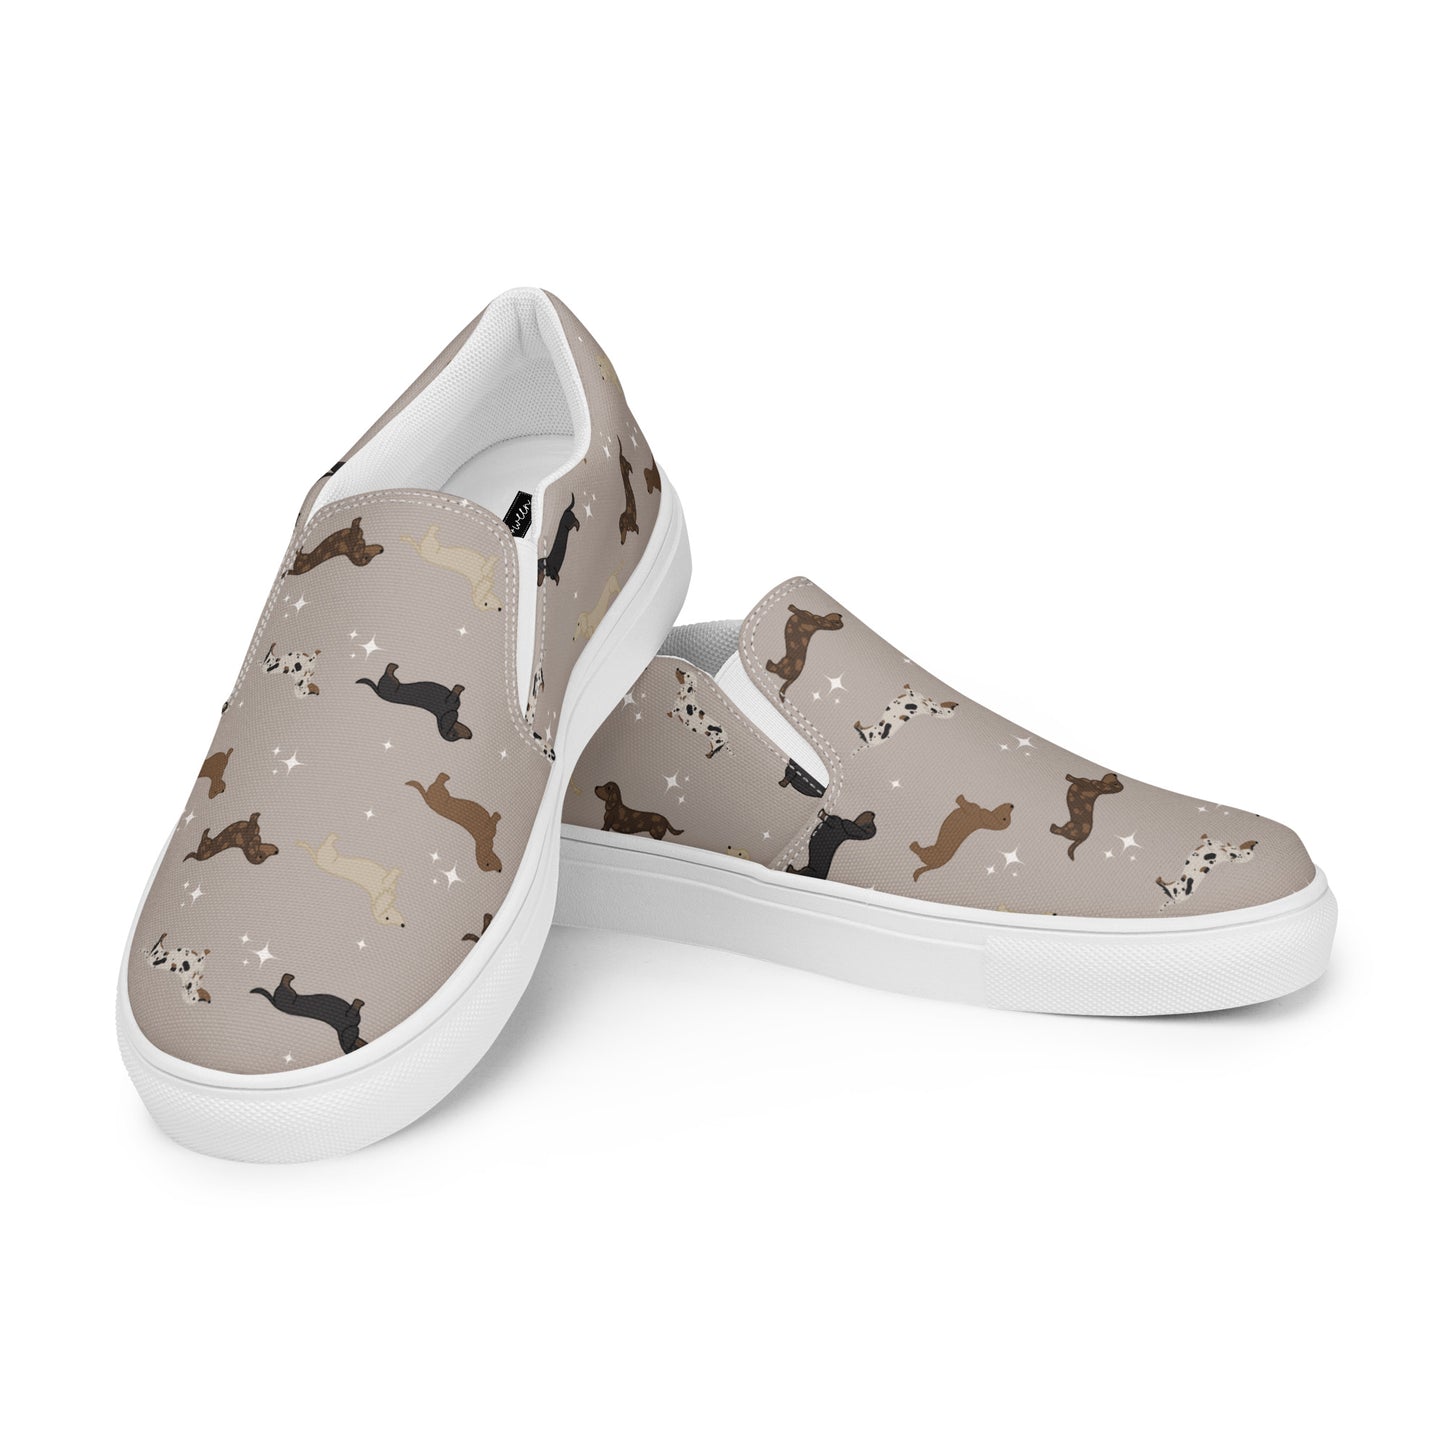 Women’s slip-on shoes - WHIMSICAL WEENS